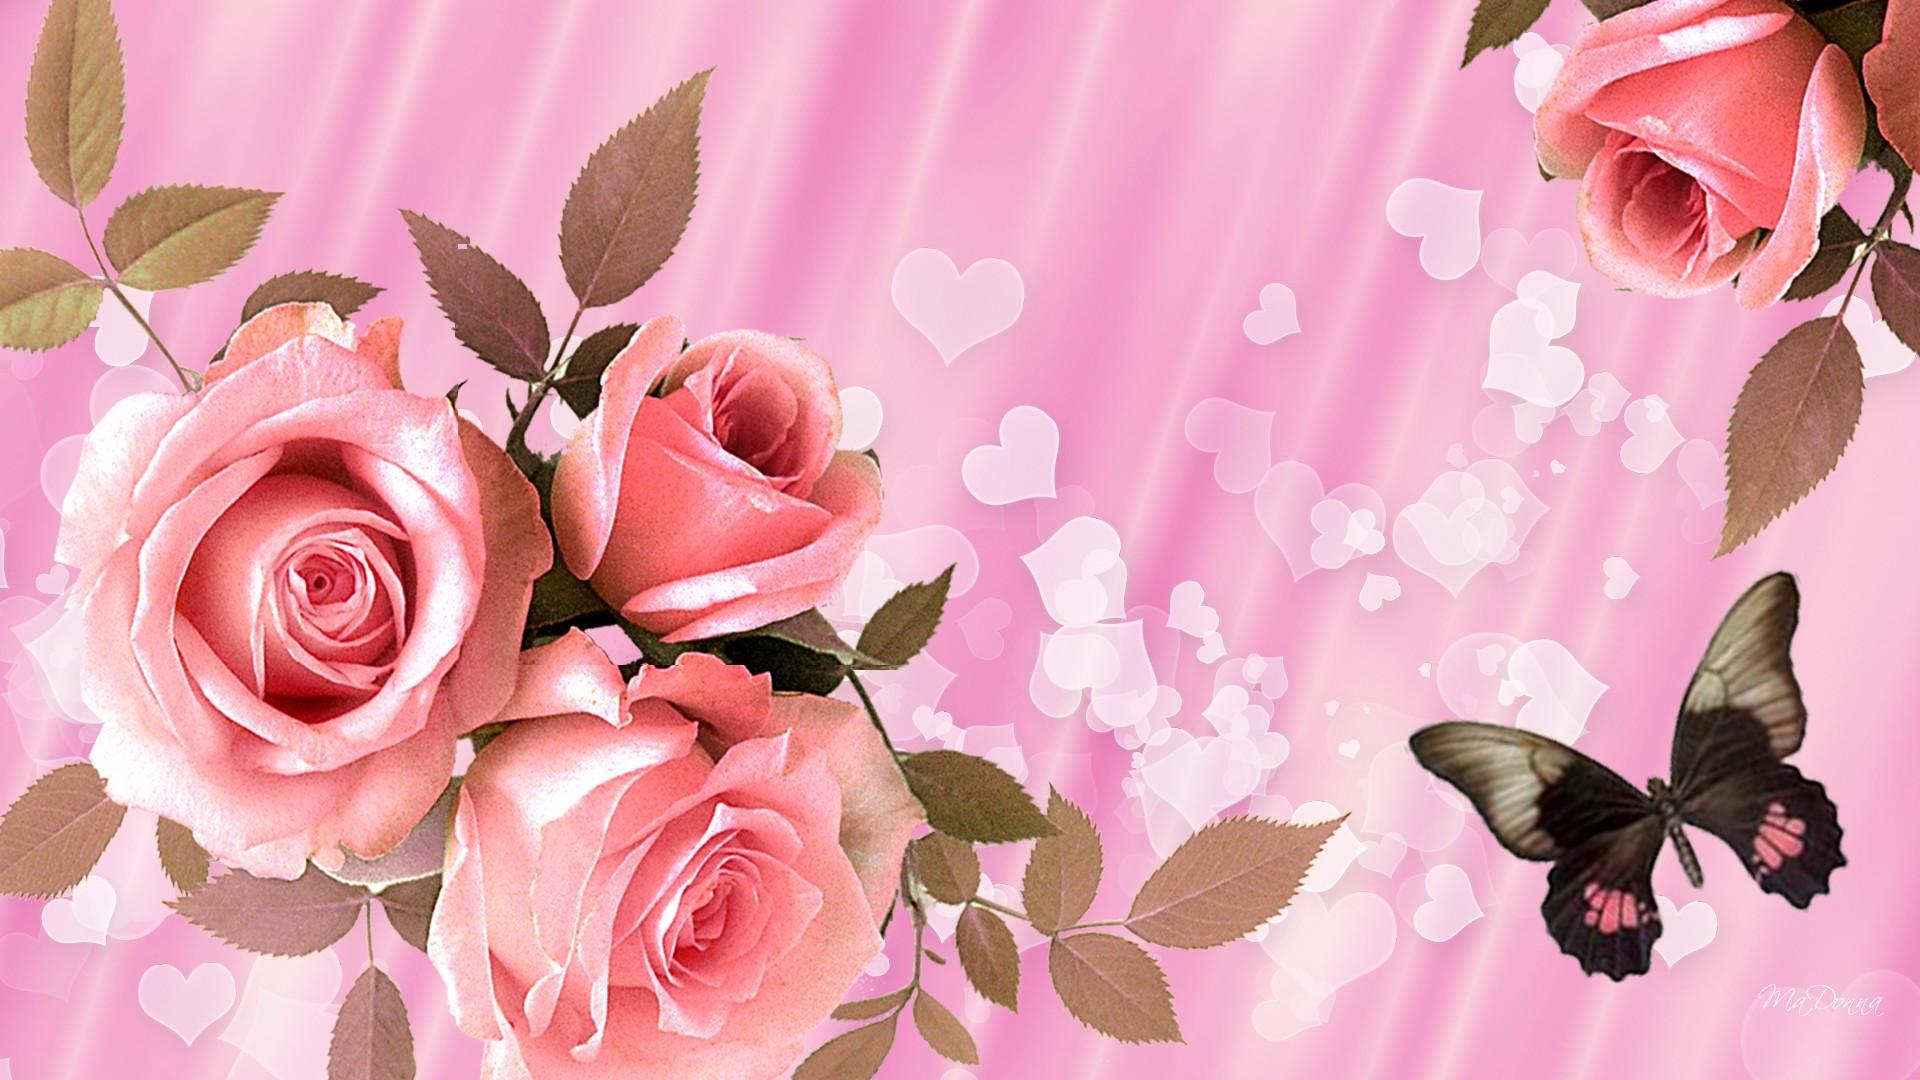 Download 1920x1080 Pink Roses For Valentine wallpaper